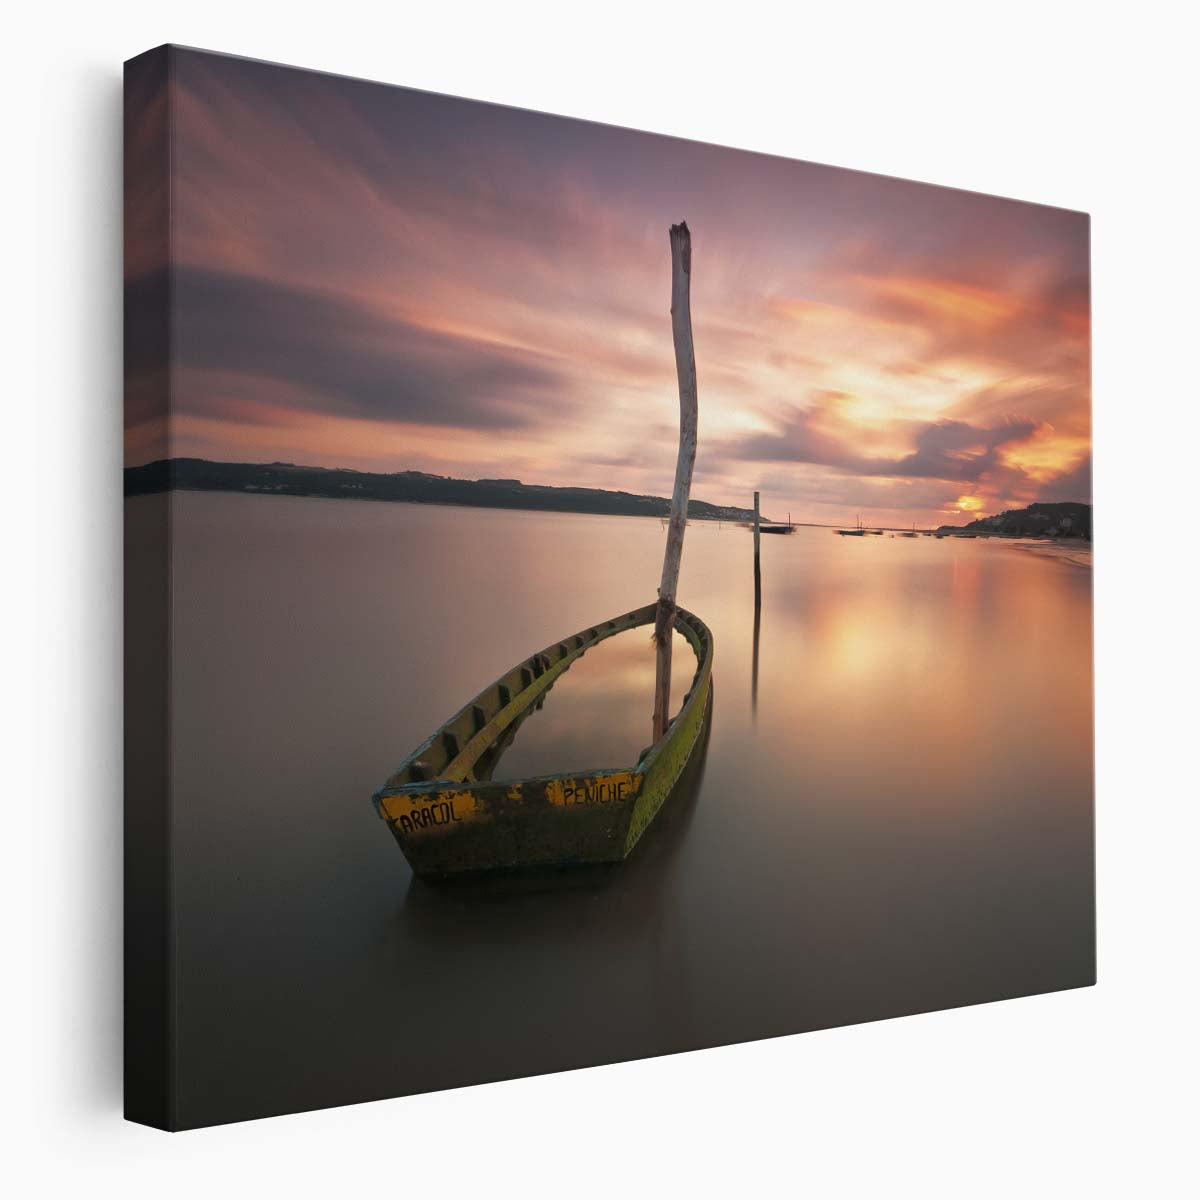 Serene Sunset Shipwreck Seascape Wall Art by Luxuriance Designs. Made in USA.